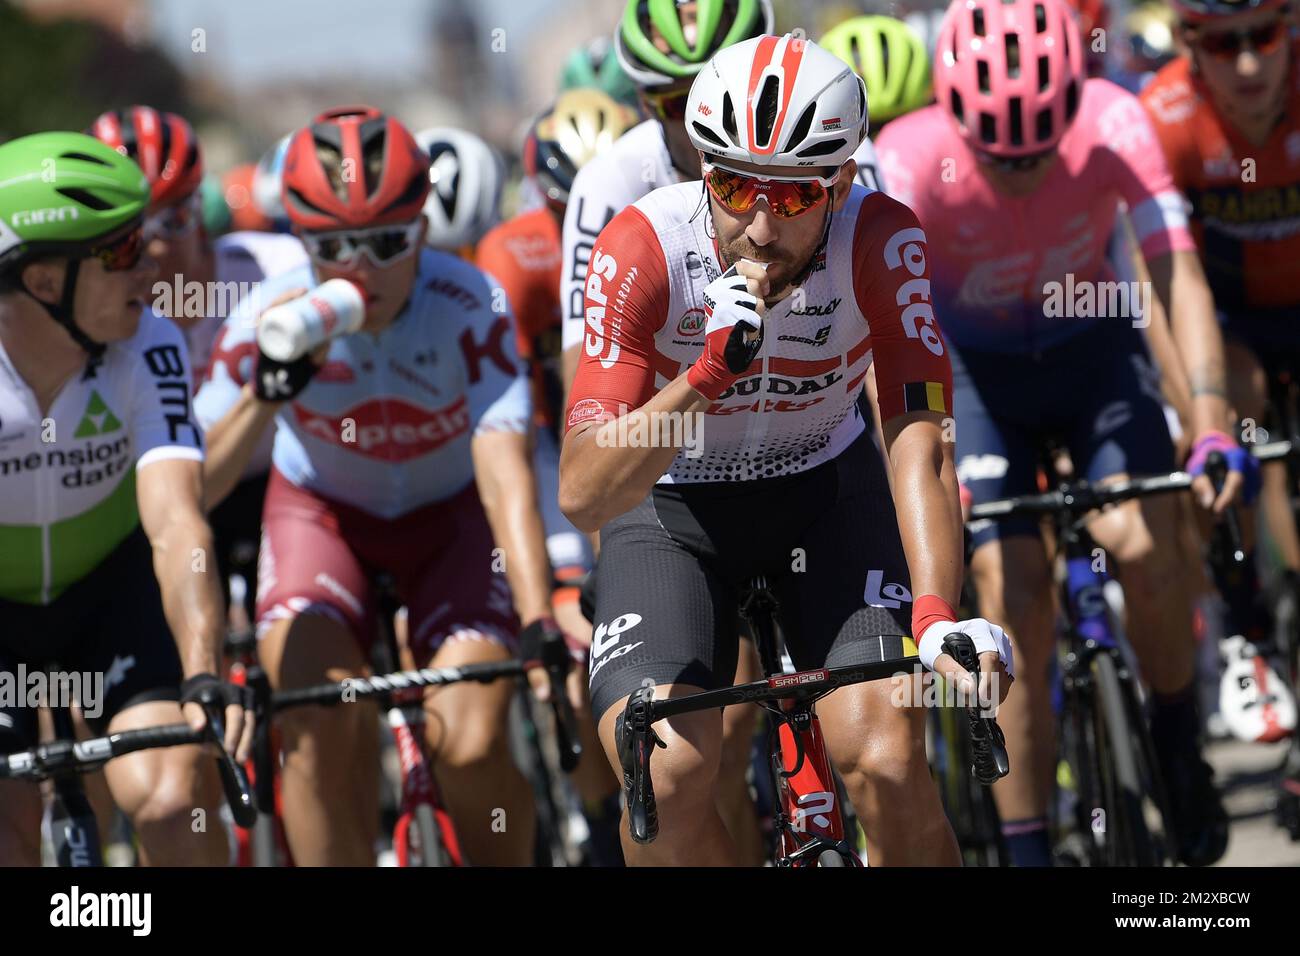 Belgian Thomas De Gendt of Lotto Soudal pictured at the start of the fifth stage of the 106th edition of the Tour de France cycling race, 175,5 km from Saint-Die-des-Vosges to Colmar, Wednesday 10 July 2019. This year's Tour de France starts in Brussels and takes place from July 6th to July 28th. BELGA PHOTO YORICK JANSENS Stock Photo